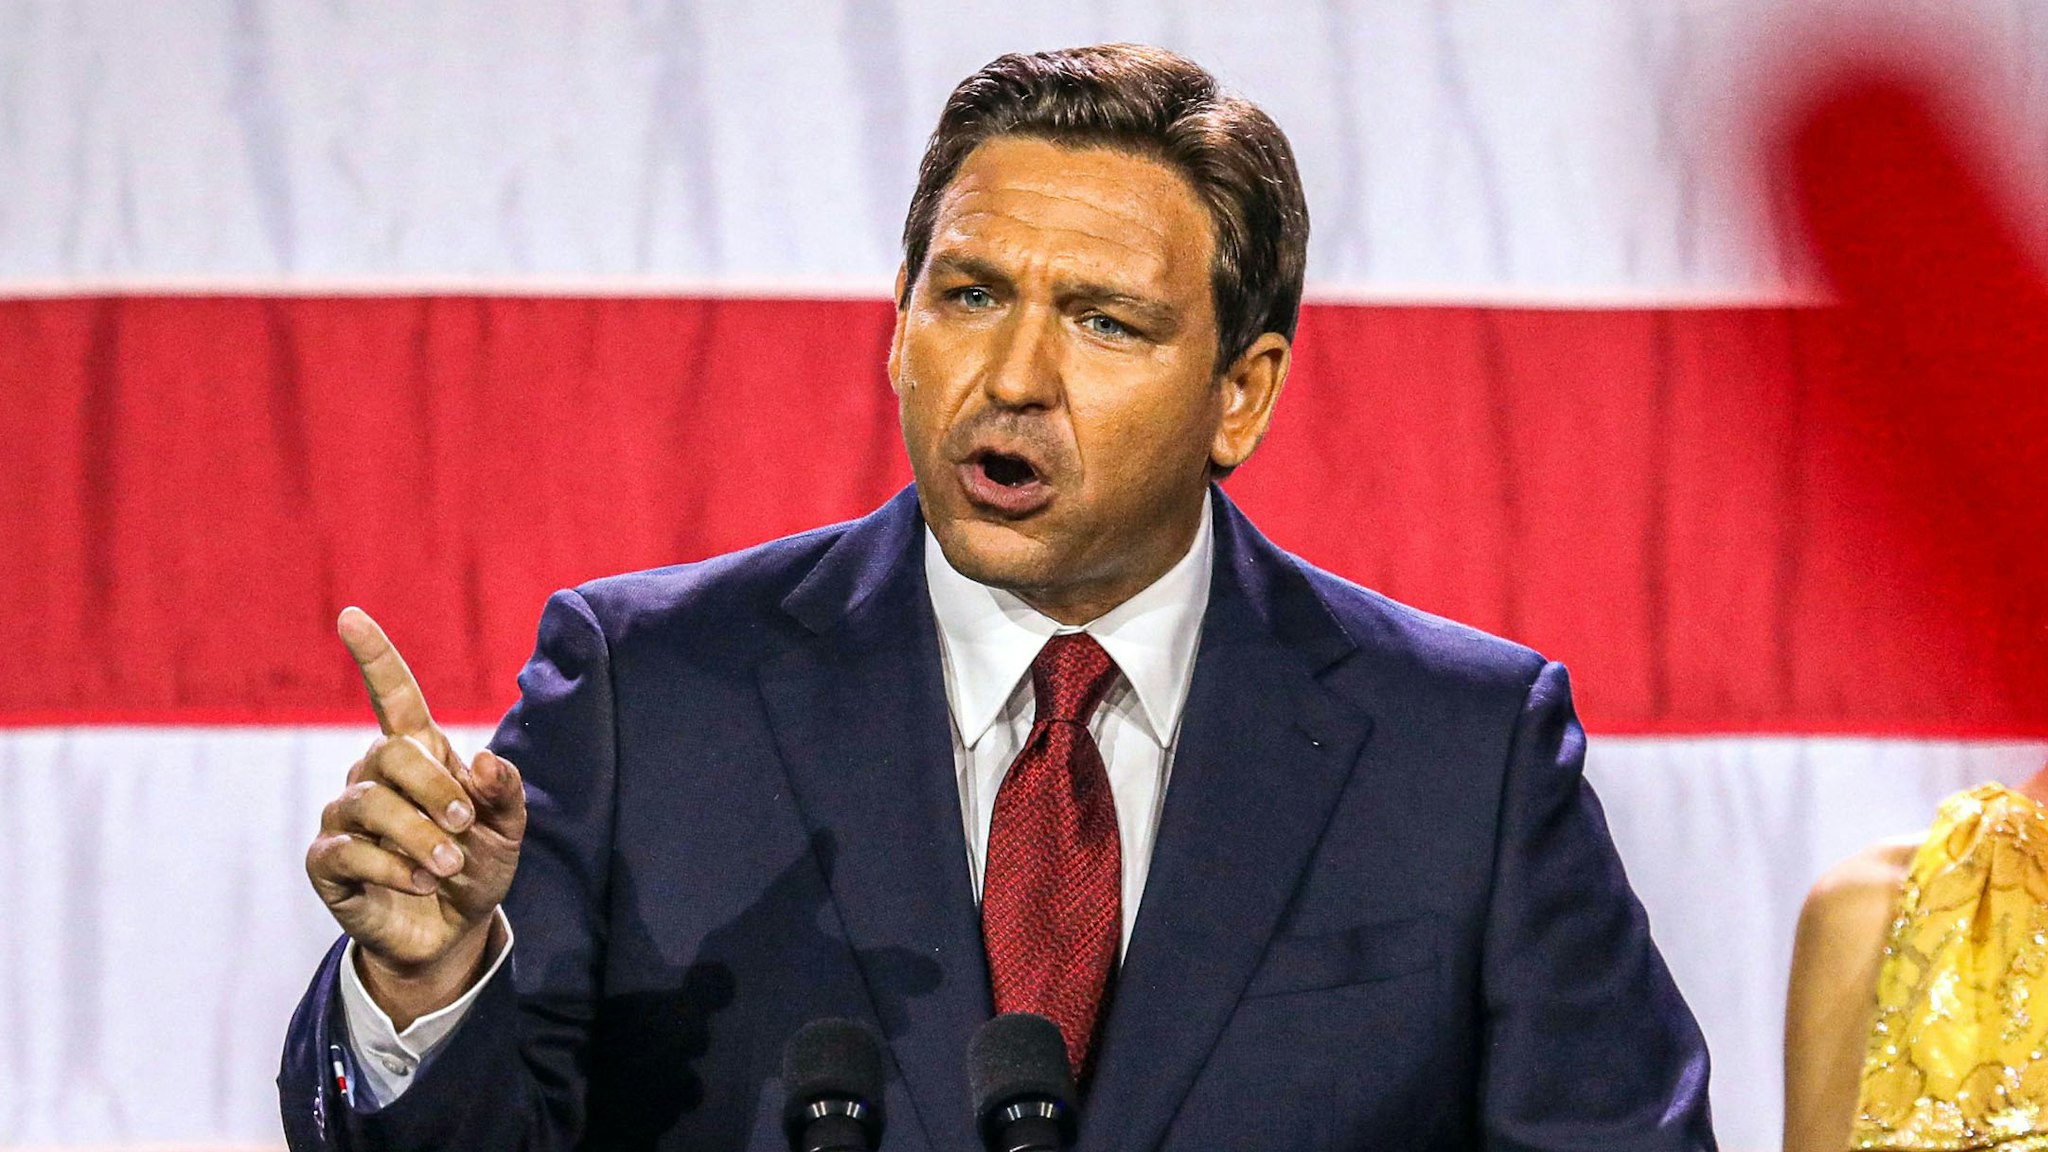 Republican gubernatorial candidate for Florida Ron DeSantis speaks during an election night watch party at the Convention Center in Tampa, Florida, on November 8, 2022. - Florida Governor Ron DeSantis, who has been tipped as a possible 2024 presidential candidate, was projected as one of the early winners of the night in the November 8 midterm election.